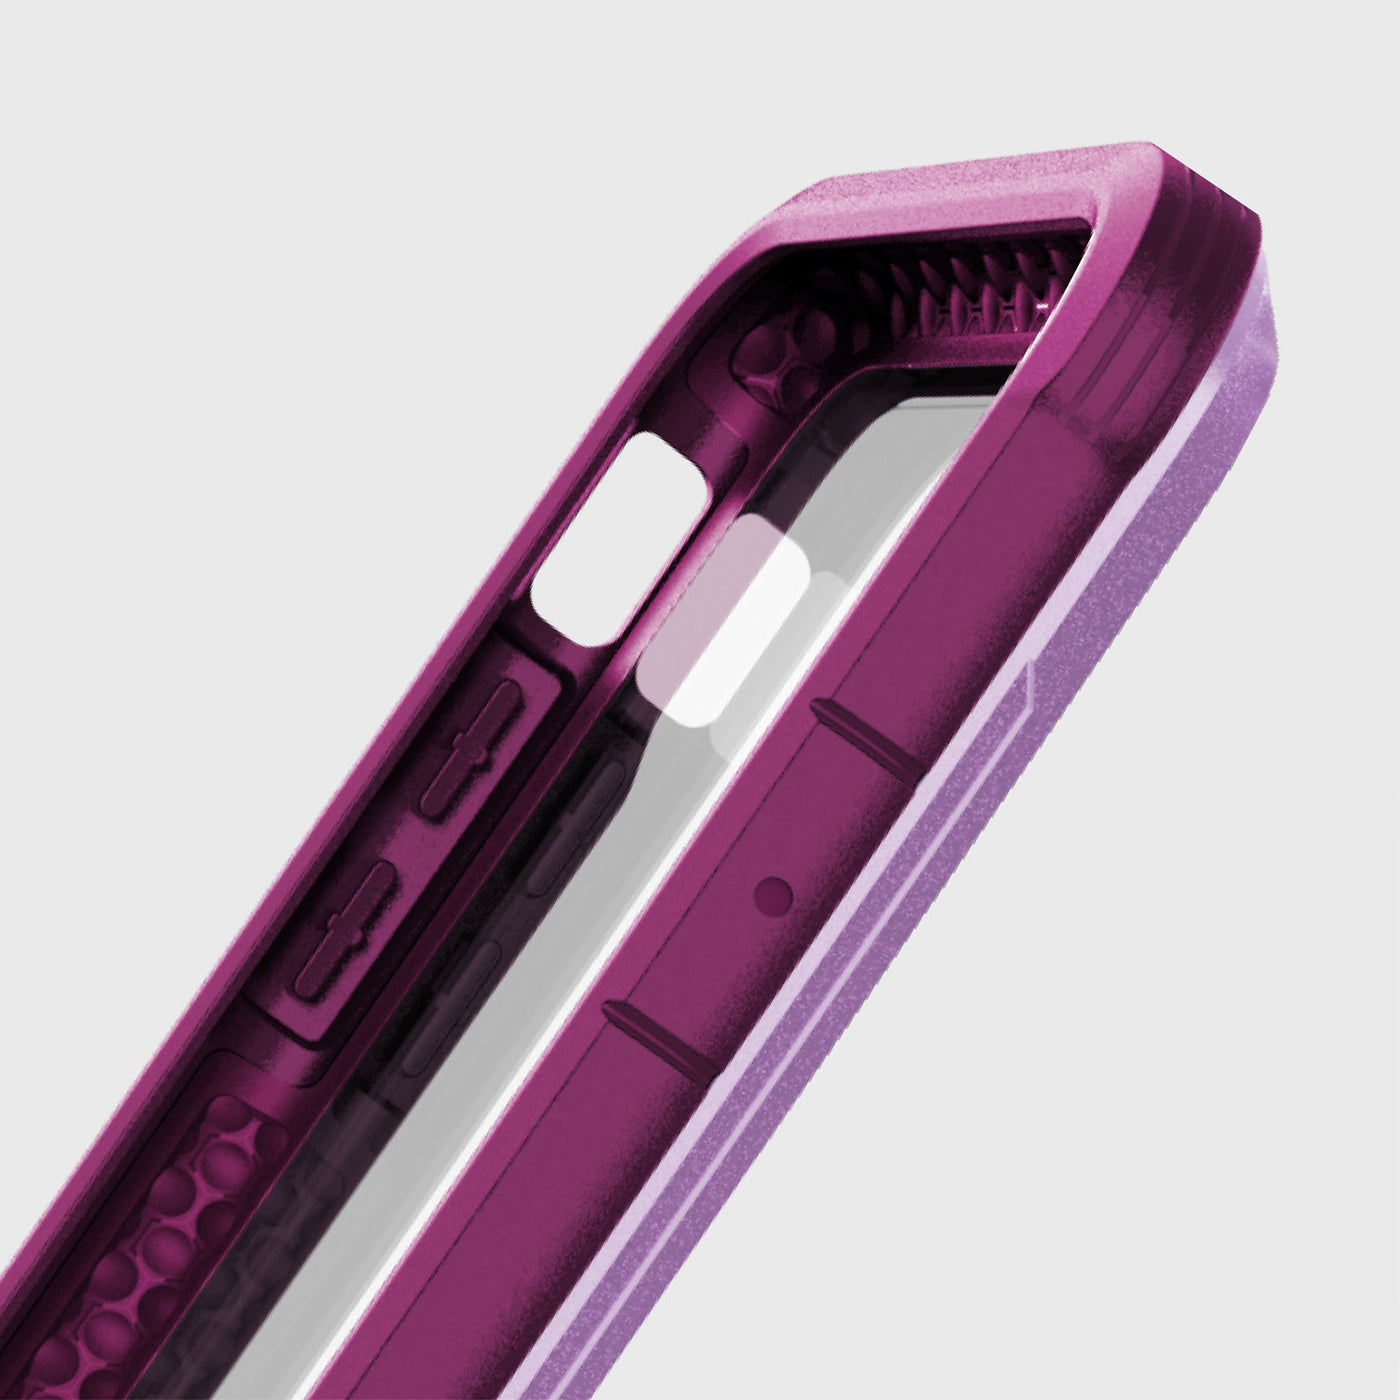 Rugged Case for iPhone XS Max. Raptic Shield in purple.